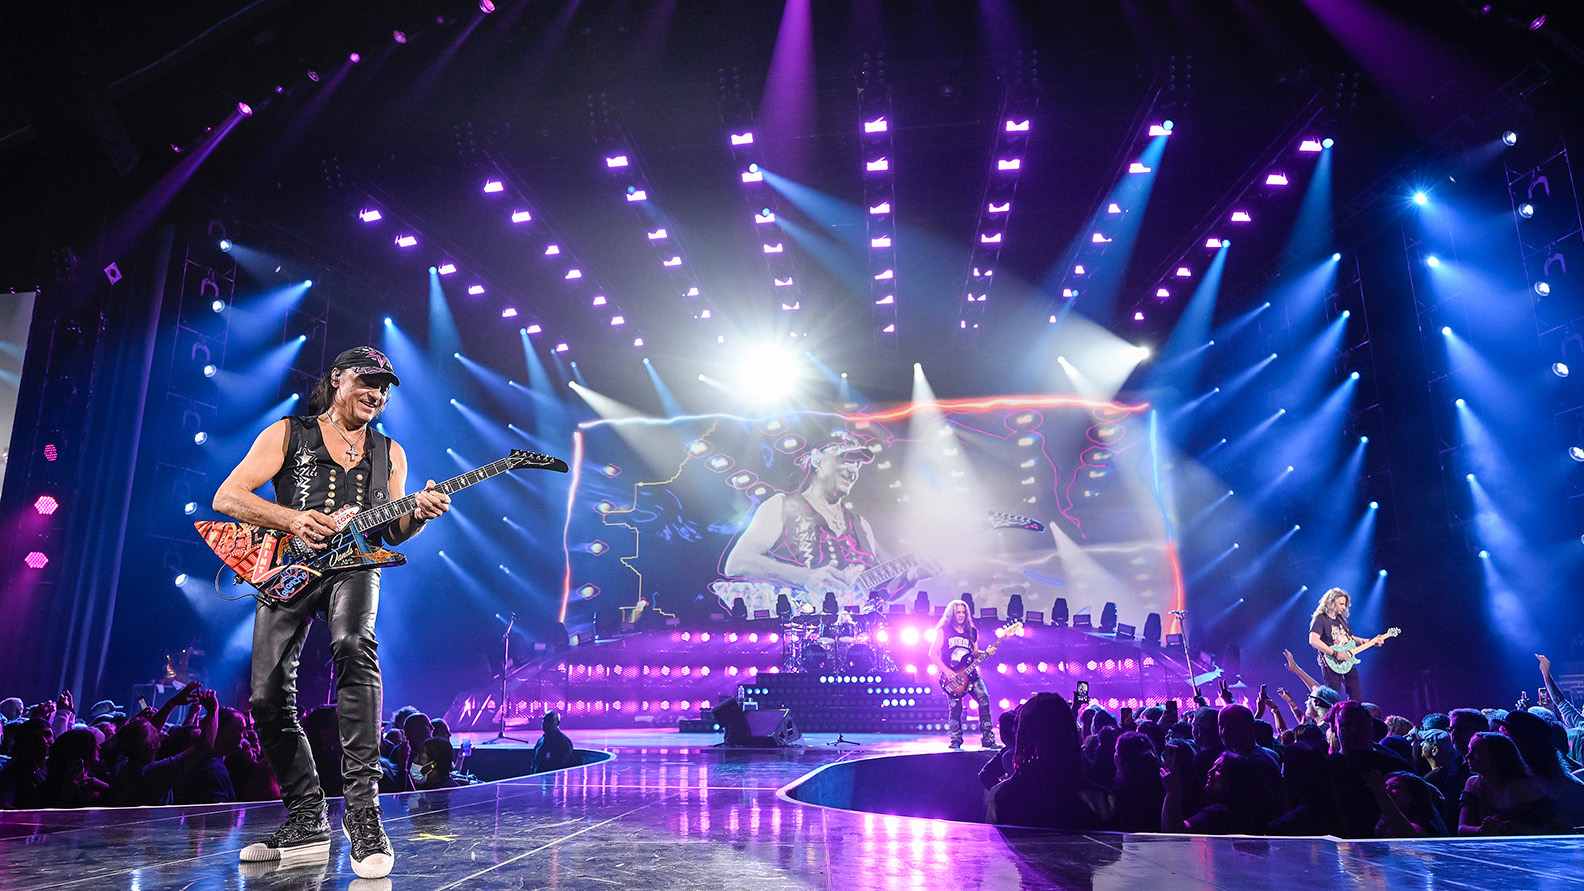 Scorpions tour Rock Believer worldwide in a stage set packed with GLP lighting